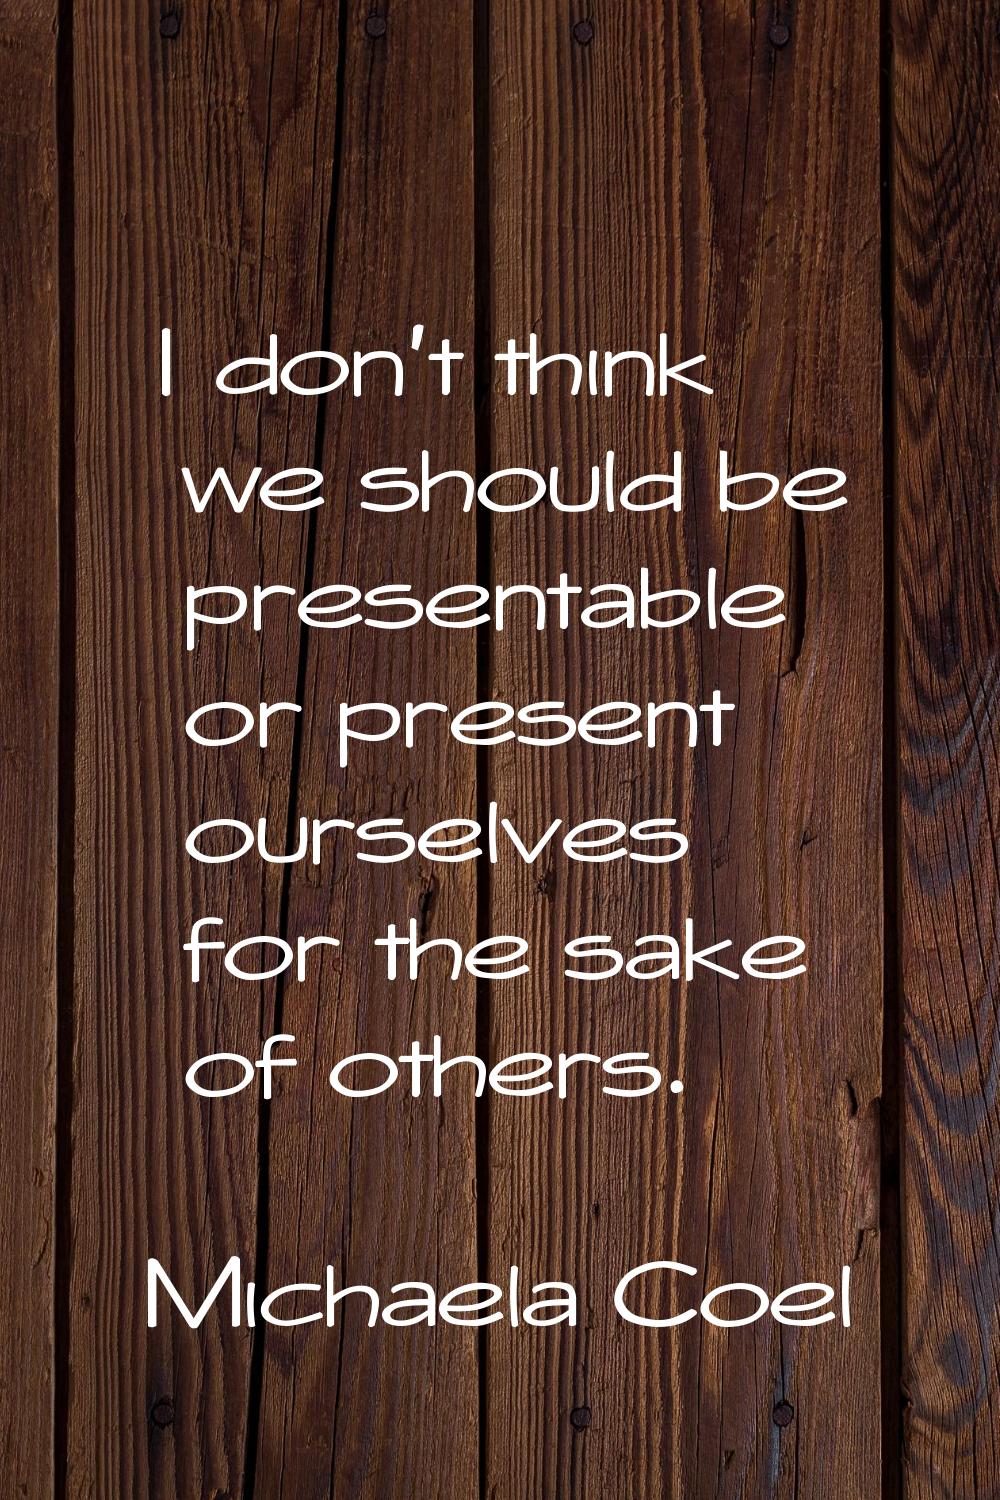 I don't think we should be presentable or present ourselves for the sake of others.